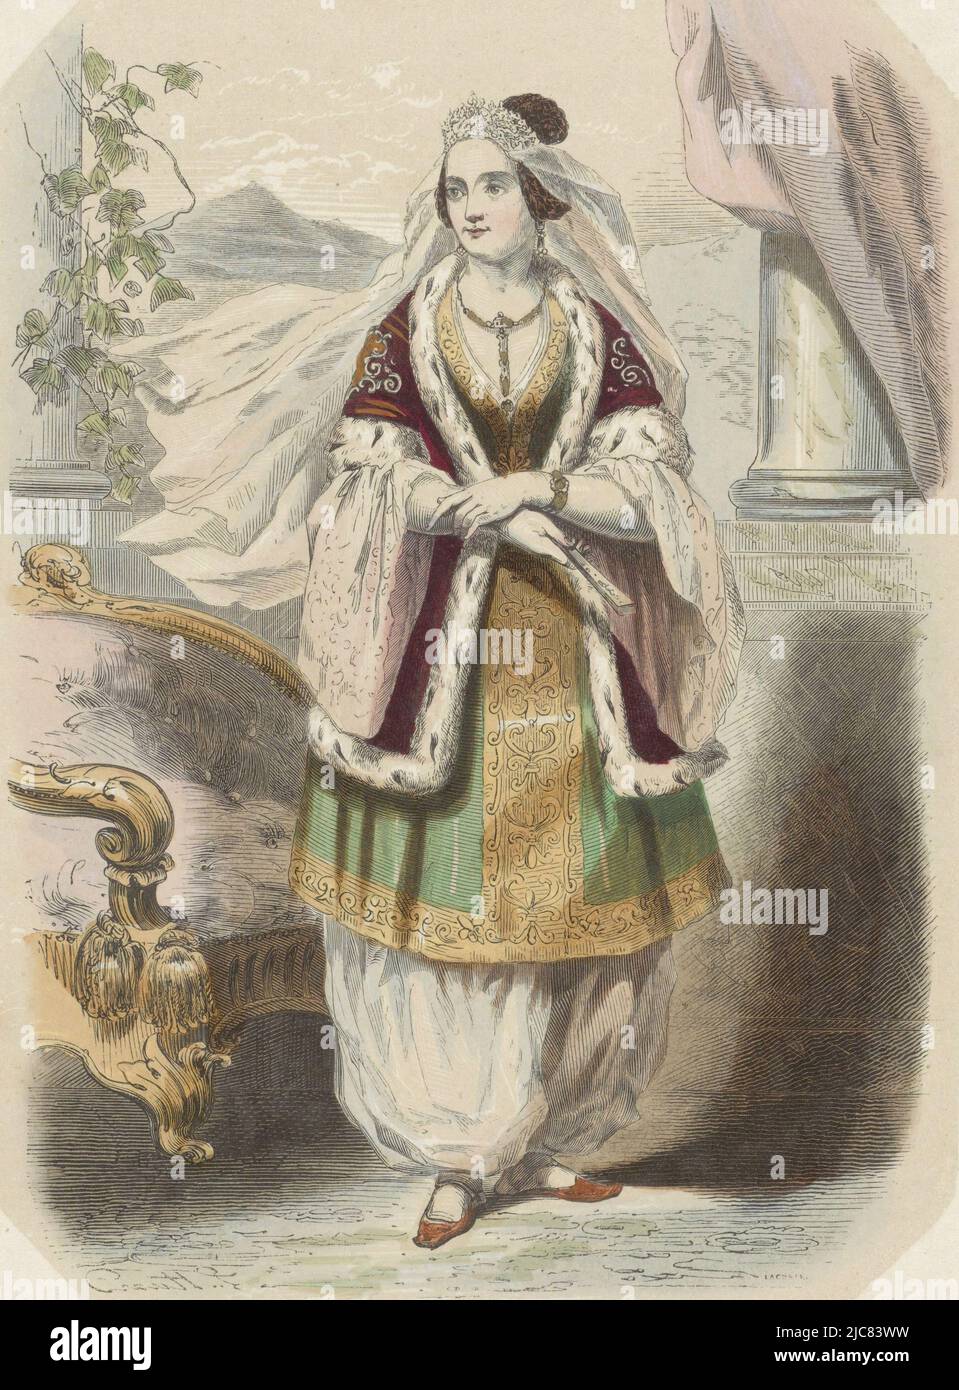 Portrait of Amalia of Oldenburg, Queen of Greece, print maker: J.L. Lacoste, (mentioned on object), Huart, (mentioned on object), Netherlands, 1852 - 1869, paper, h 277 mm - w 185 mm Stock Photo